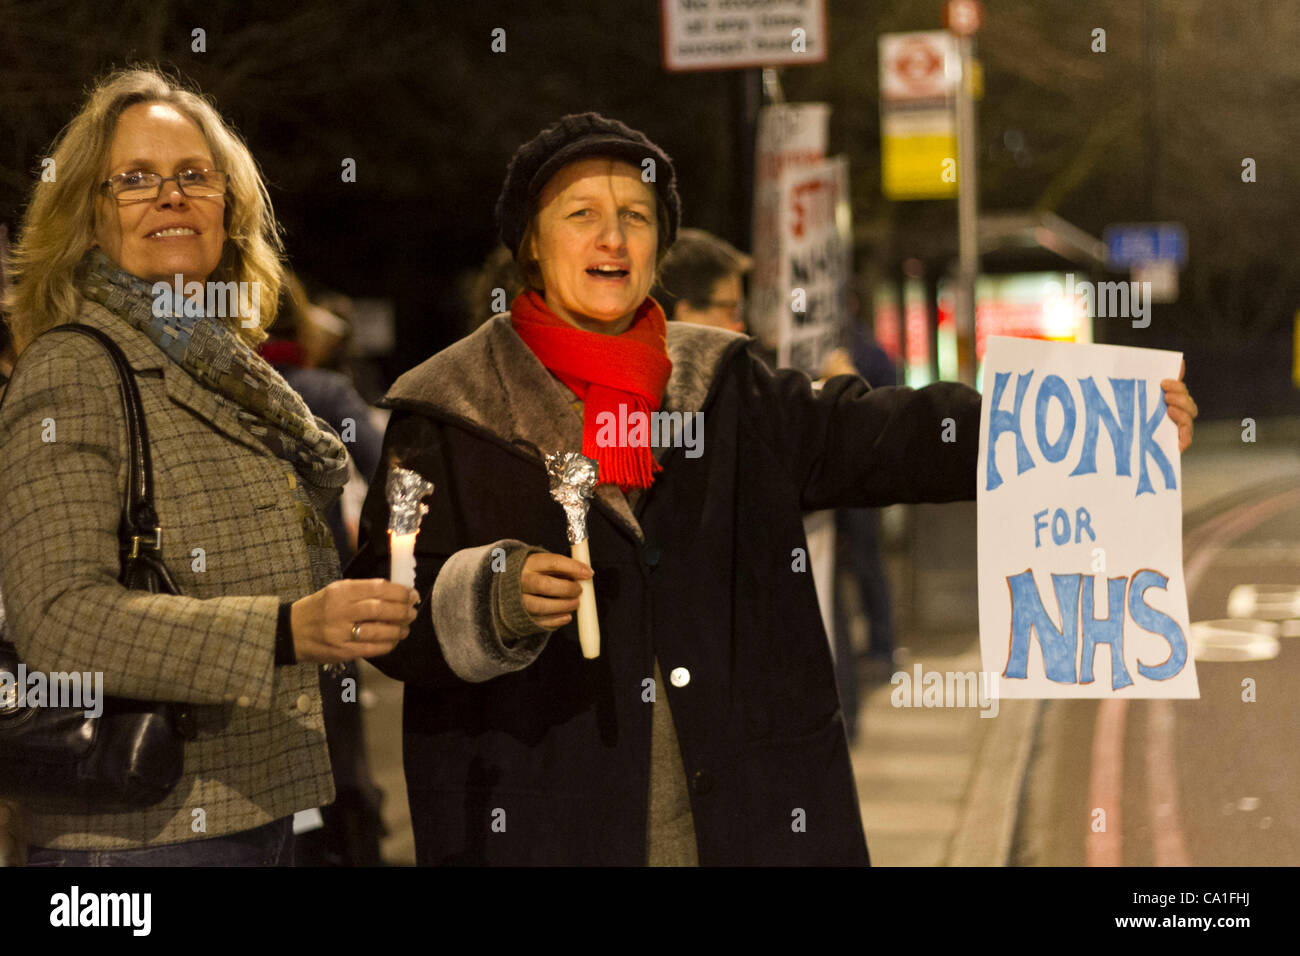 London, UK. 19/03/12. Protesters held  'Drop the NHS bill' candlelit vigil at Lambeth Palace Gardens park entrance. The proposes NHS Bill is to create a independent NHS Board, promote patient choice, and to reduce NHS administration costs. Stock Photo